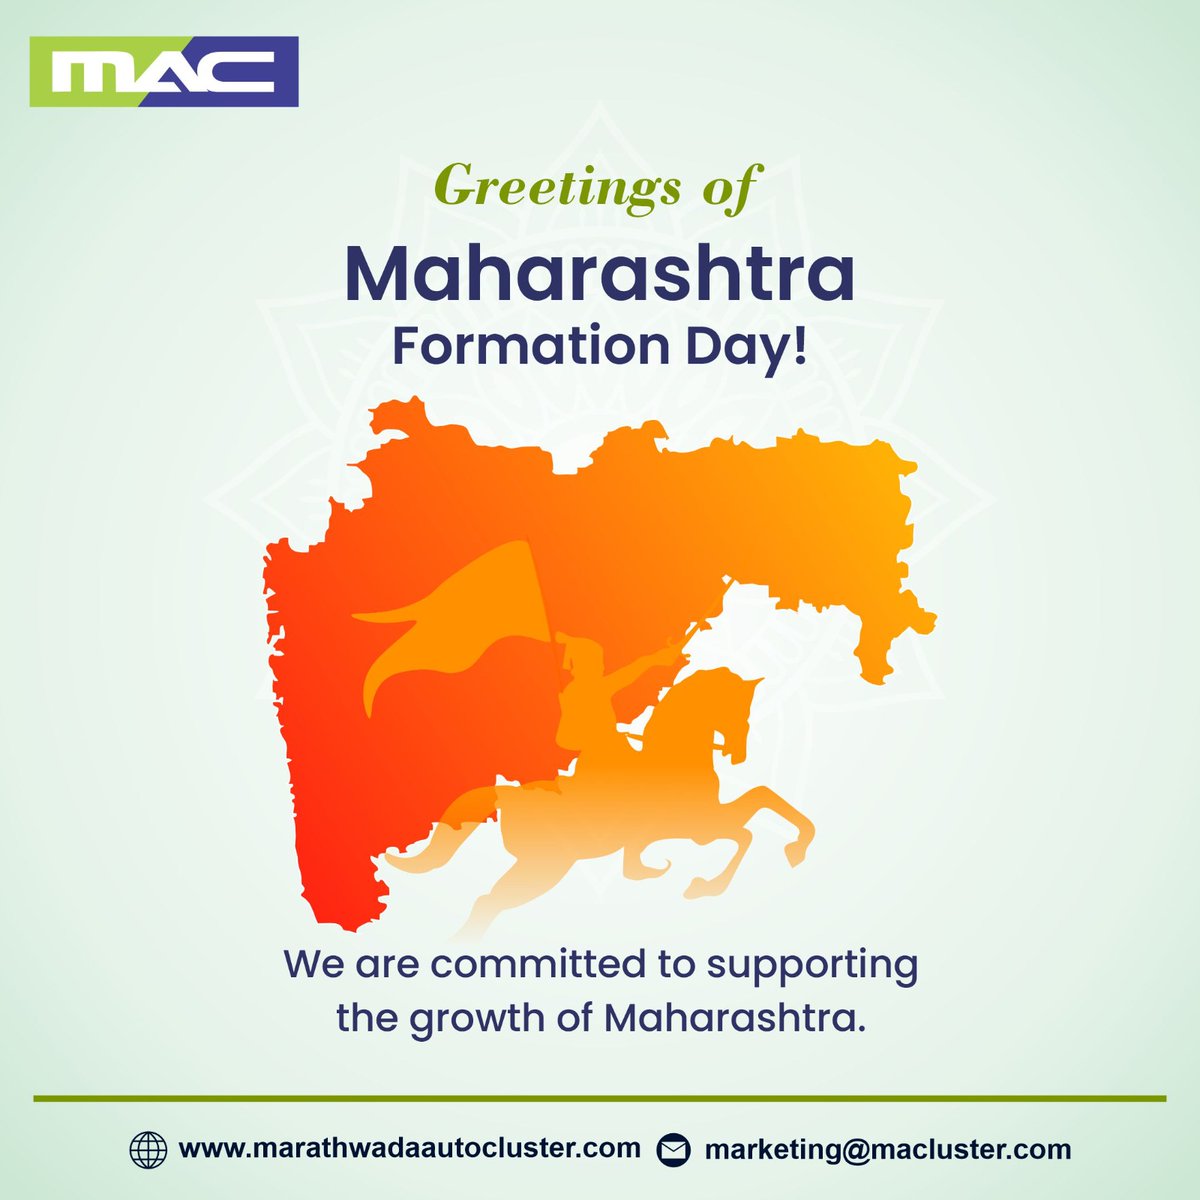 Happy Maharashtra Day! Let’s celebrate the rich culture and heritage of our state.

#HappyMaharashtraDay #foundationday #jaiMaharashtra #culture #marathi #specialday #celebration #MAC #marathwadaAutoCluster #wishes